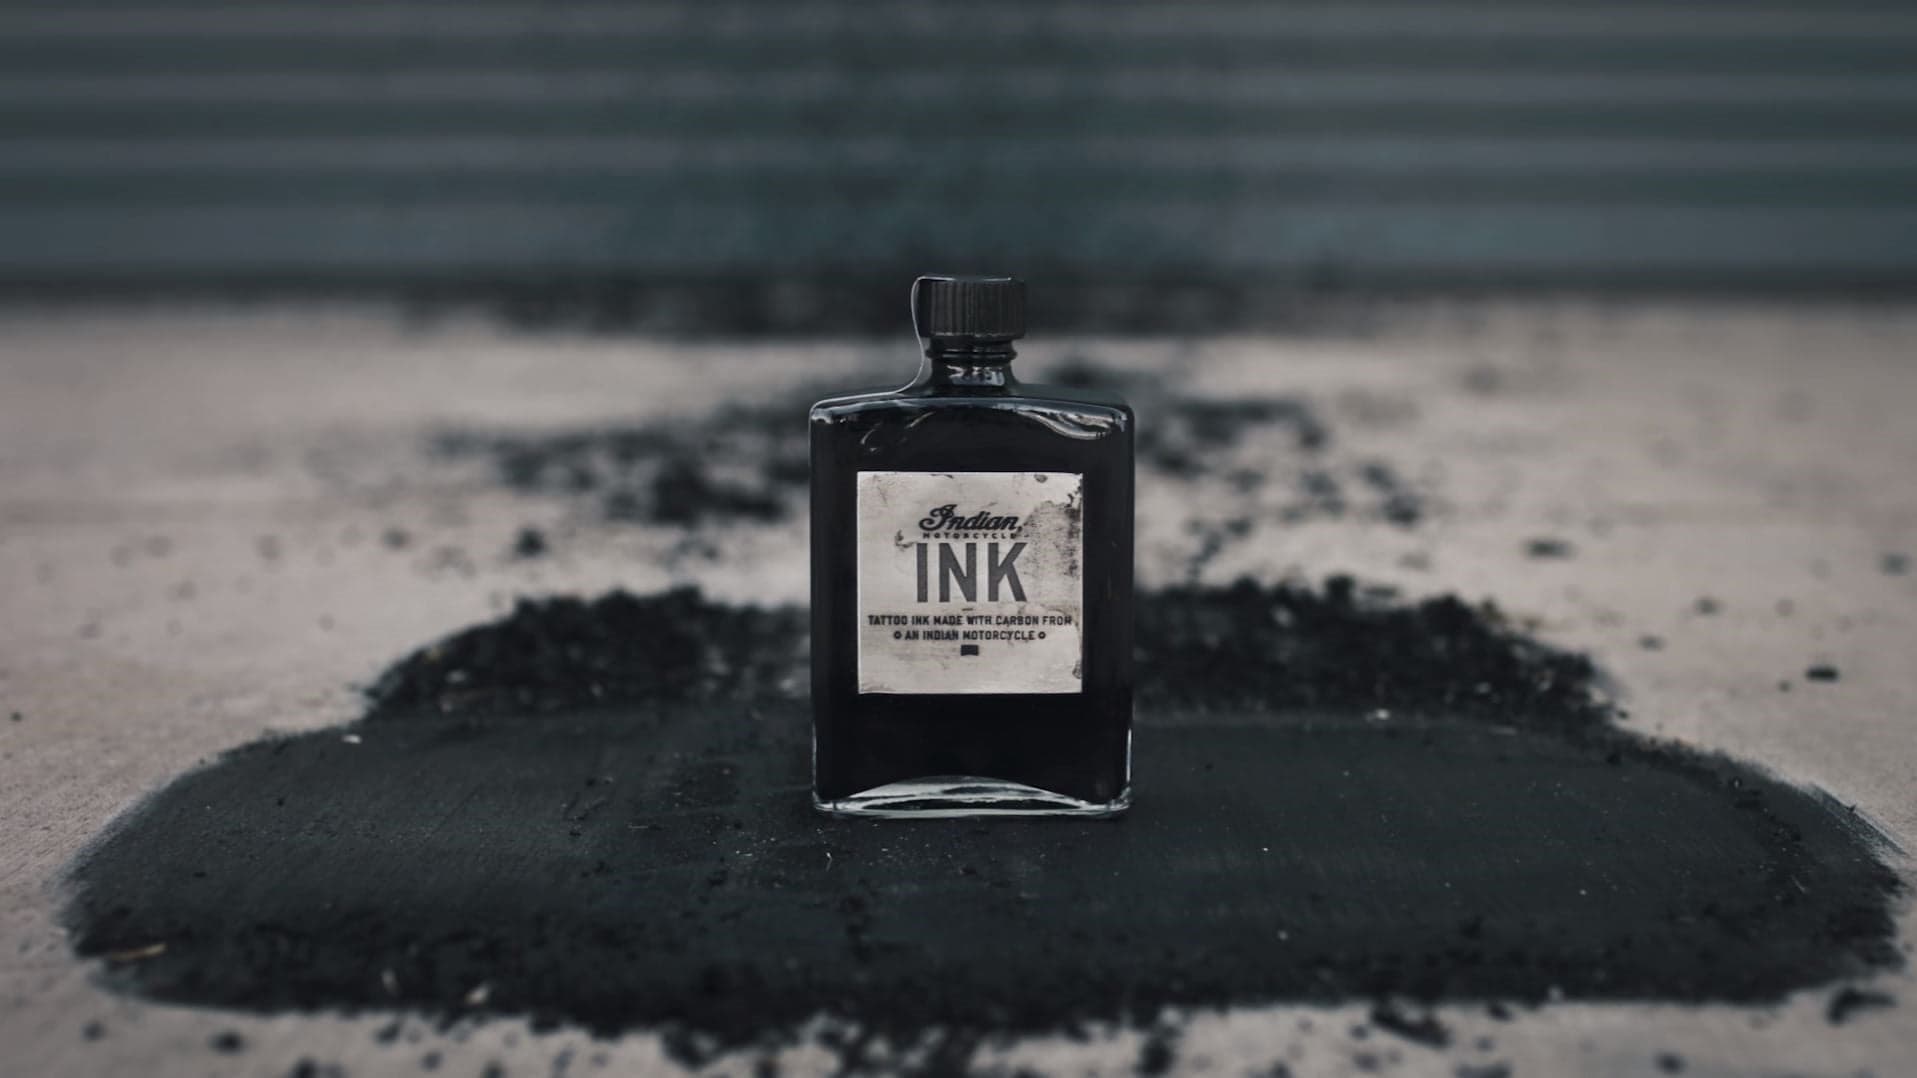 You Can Now Get a Tattoo With Ink Made From an Indian Motorcycle Burnout